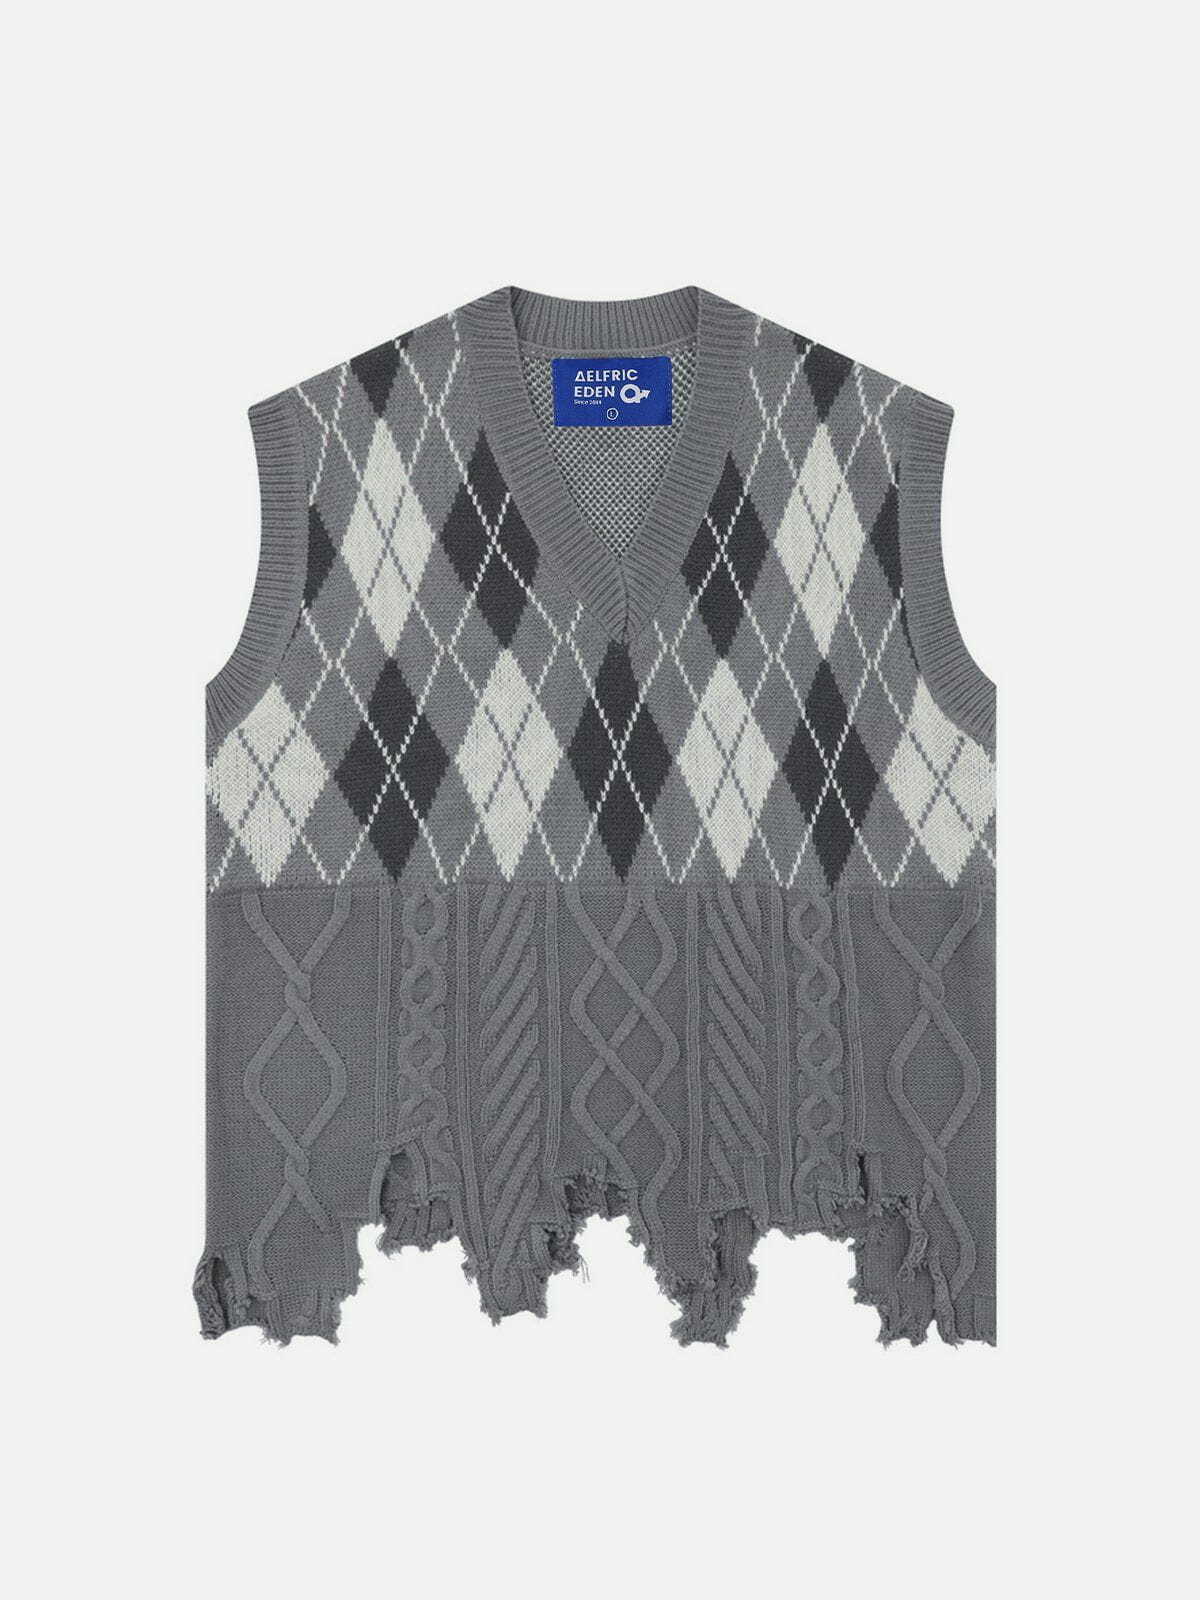 patchwork plaid vest youthful & eclectic streetwear 3314